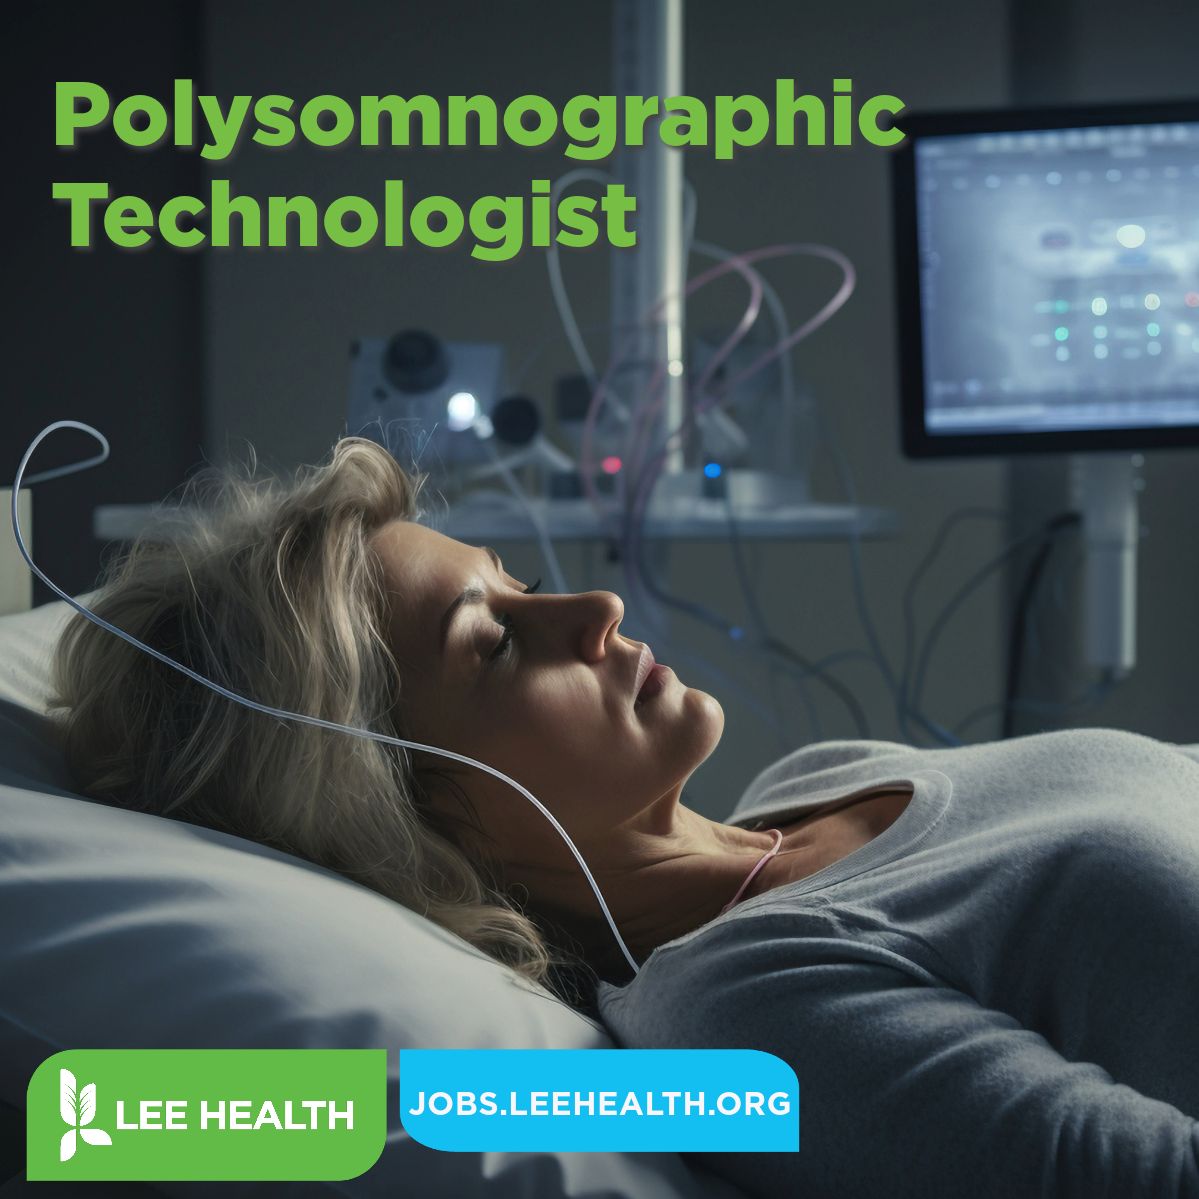 🌜💤 Now Hiring: Polysomnographic Technologist 💤🌜 Lee Health in Fort Myers, FL is offering up to $7,500 in hiring/relocation incentives! jobs.leehealth.org/job/polysomnog… 📝 #LeeHealth #PolysomnographicTechnologist #NowHiring #SleepMedicine #FortMyers #RPSGT #CPSGT #BPRT